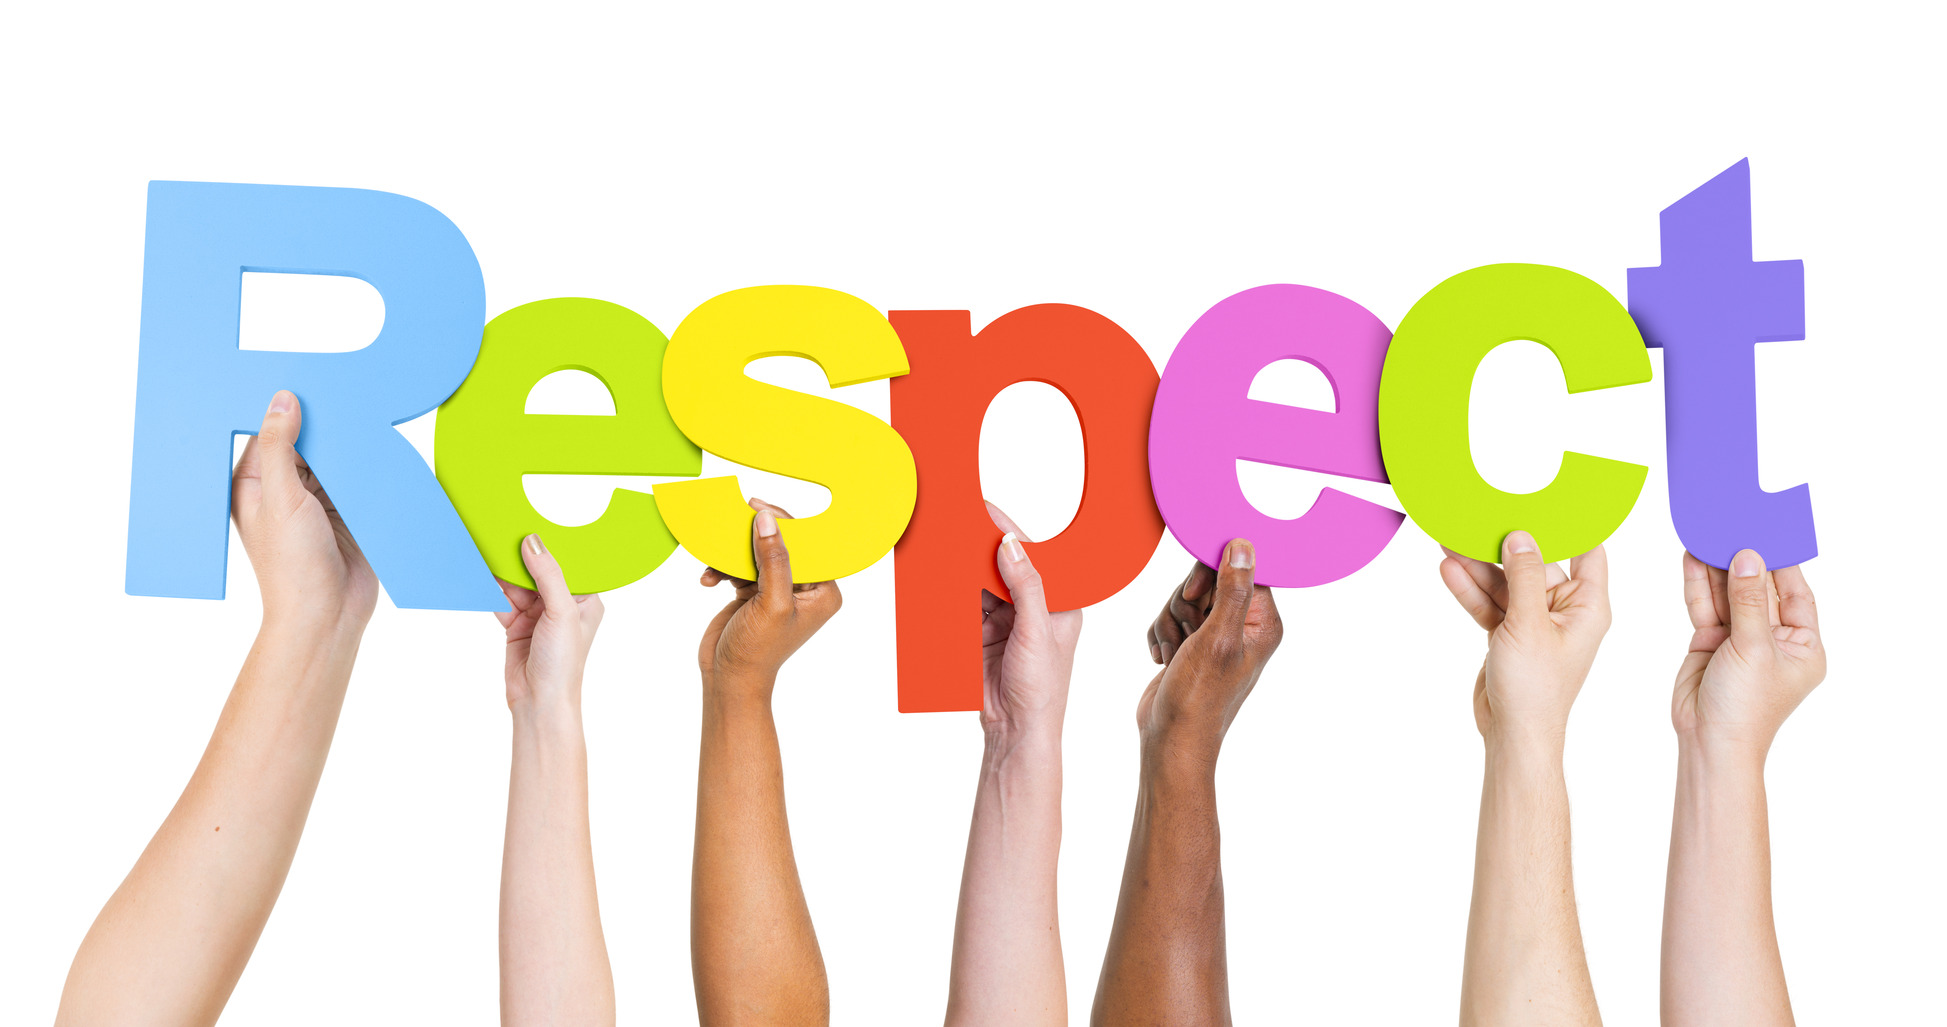 How can we gain respect from others?